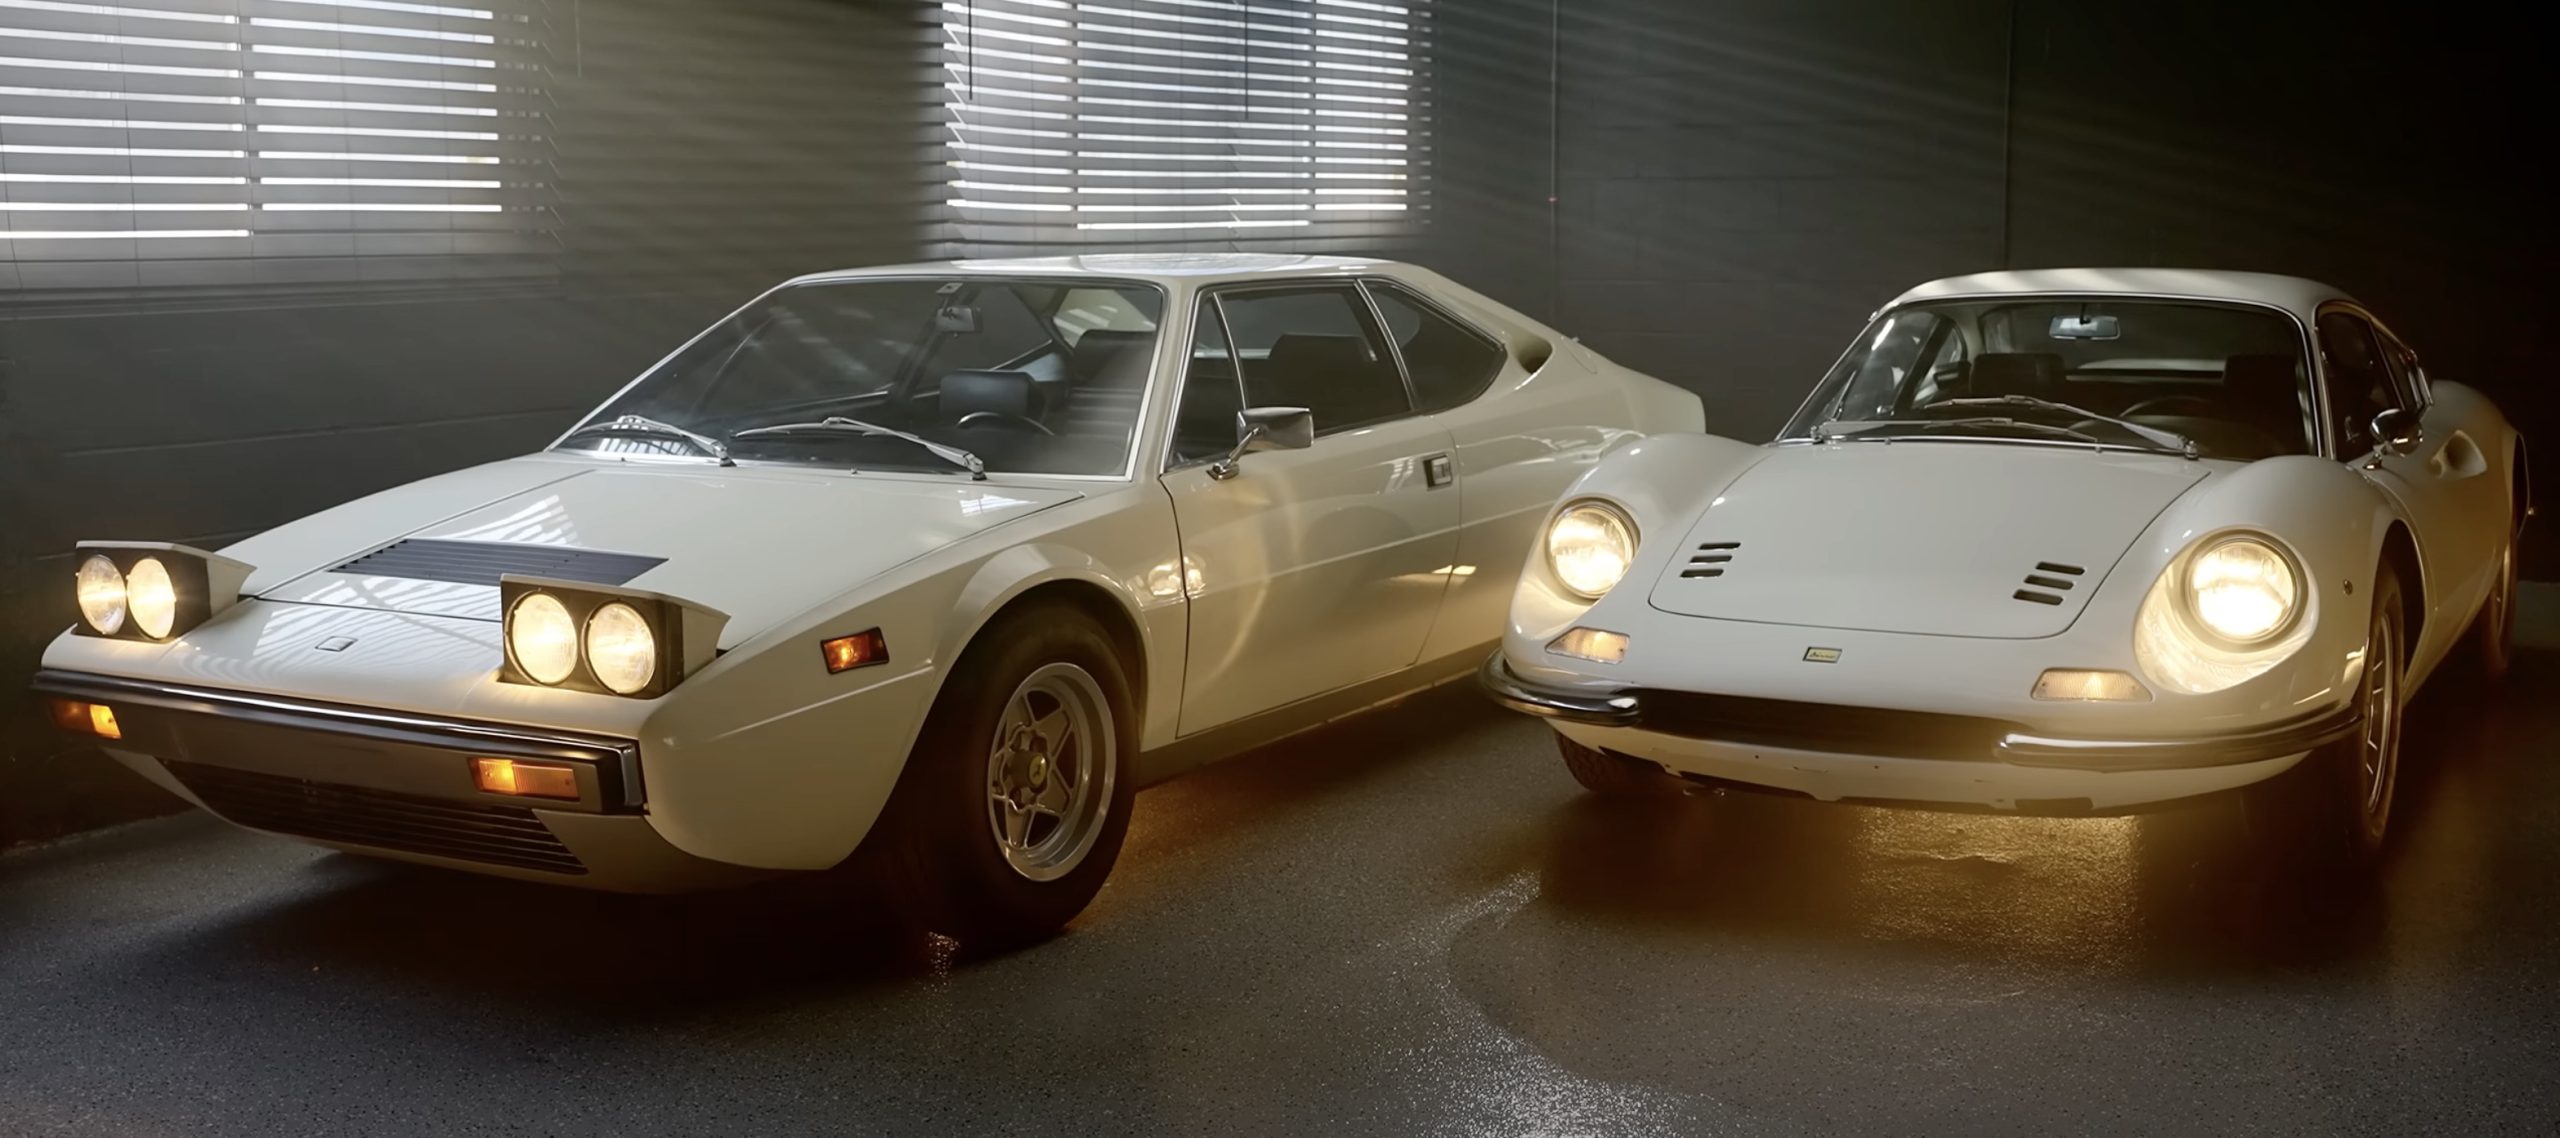 Revelations: The Dino 246 and 308 GT4 Were Not 